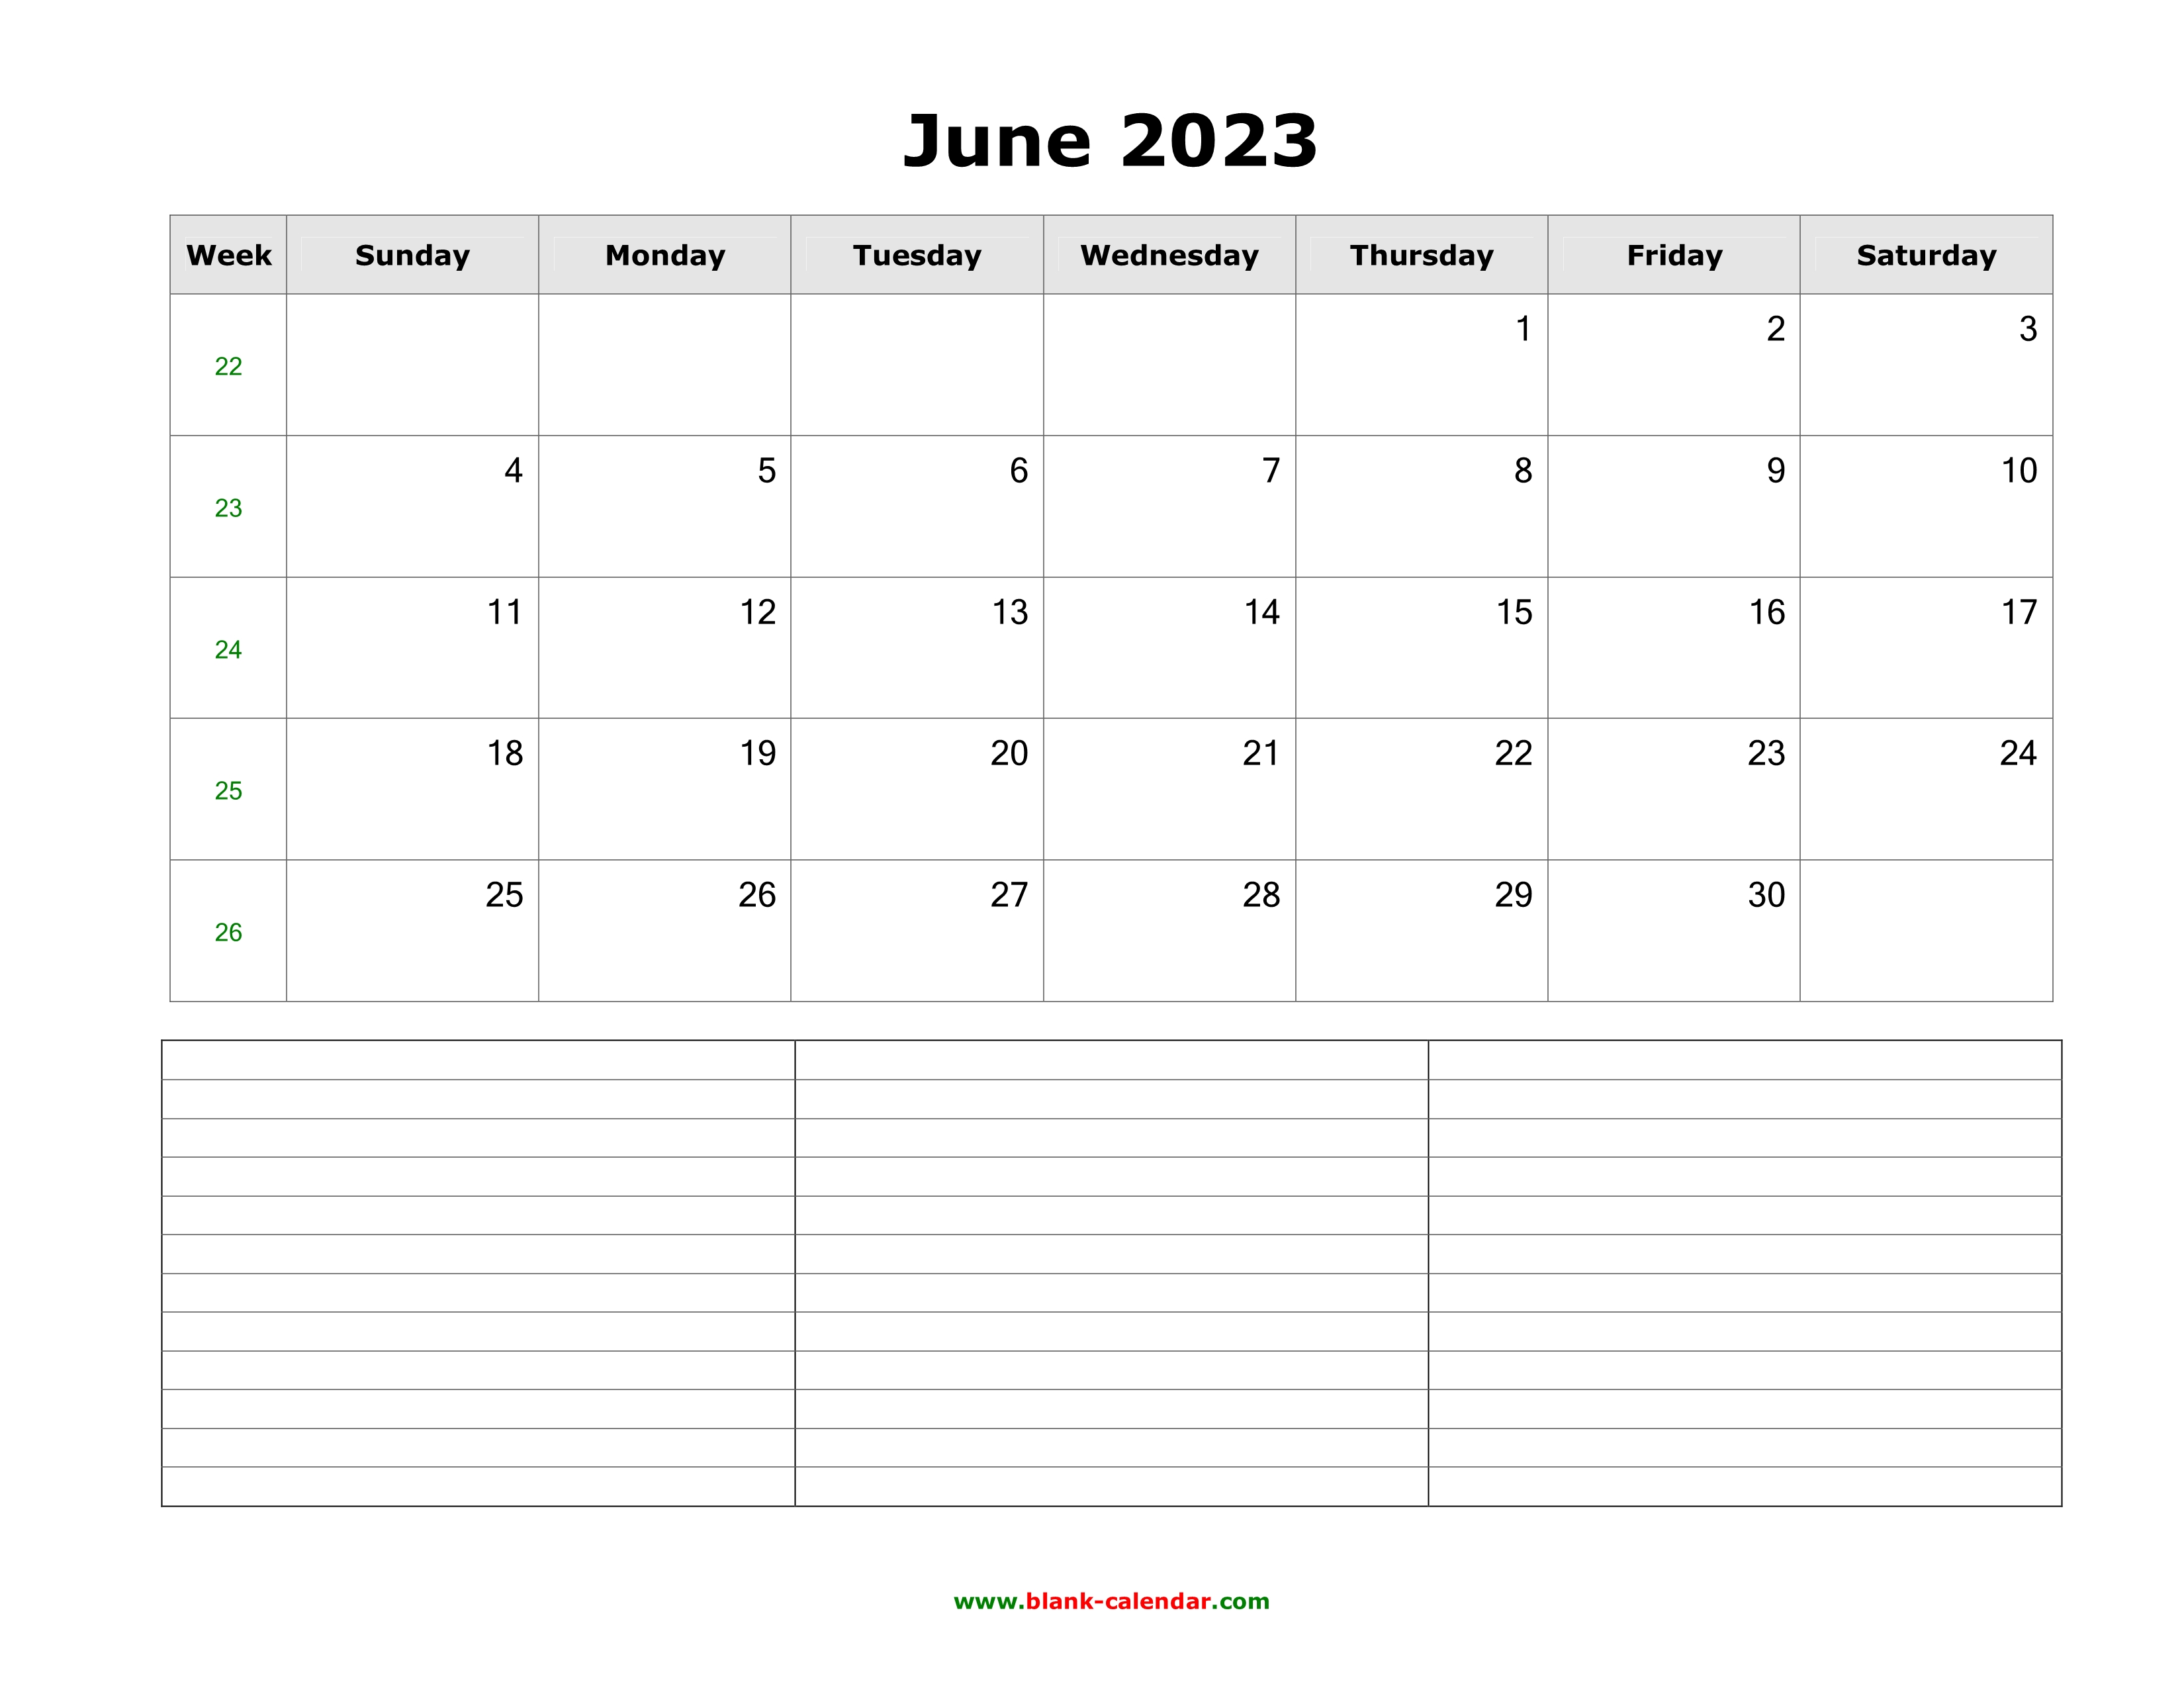 download-june-2023-blank-calendar-with-space-for-notes-horizontal